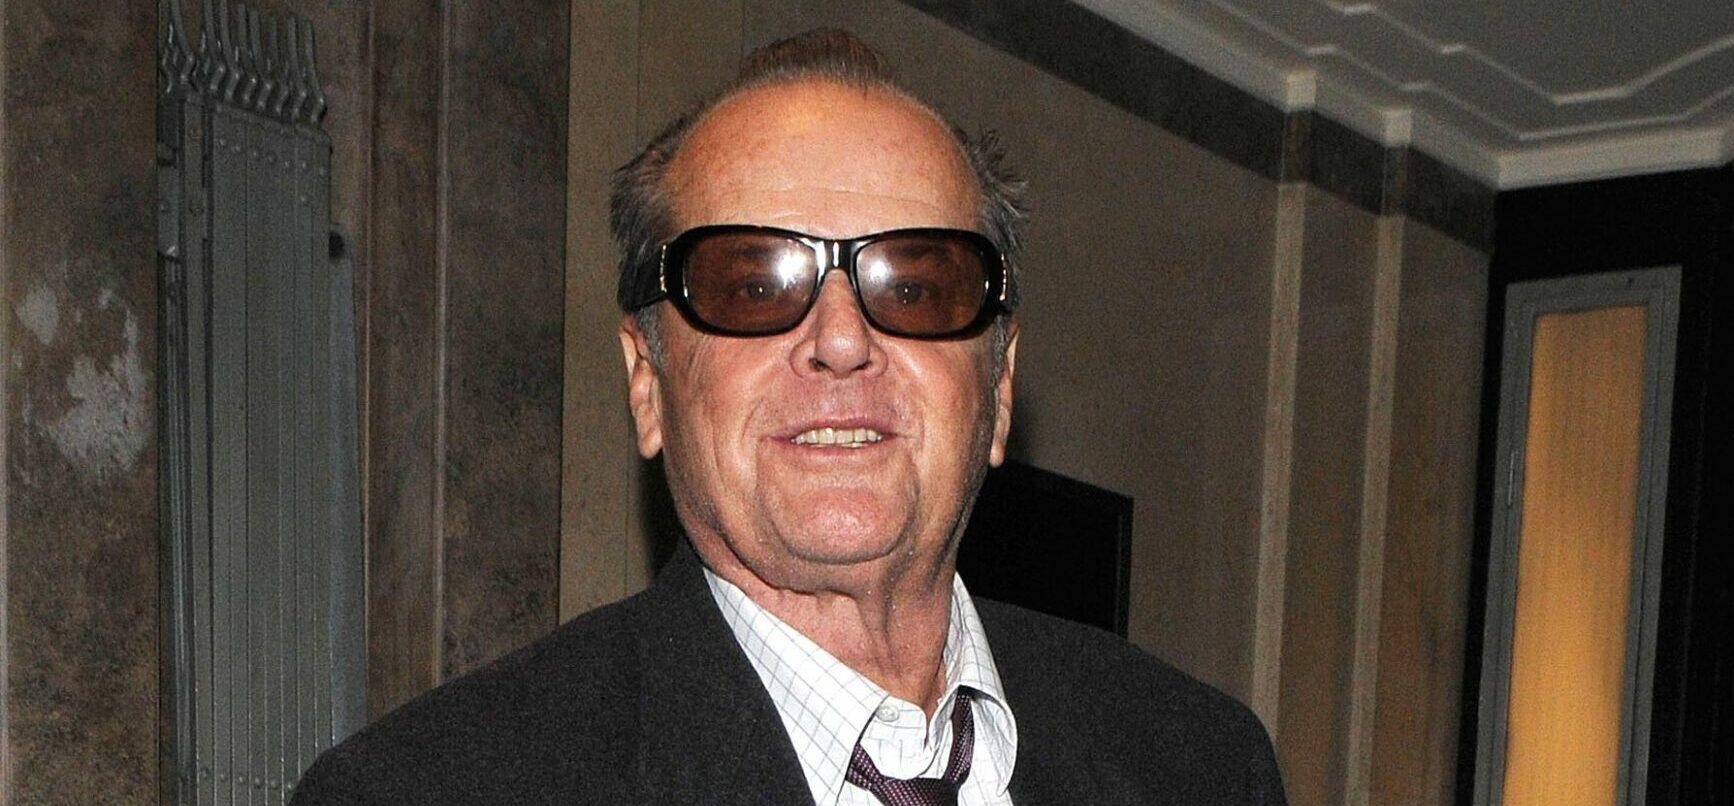 US ONLY JACK NICHOLSON ENJOYS A NIGHT OUT AT THE IVY